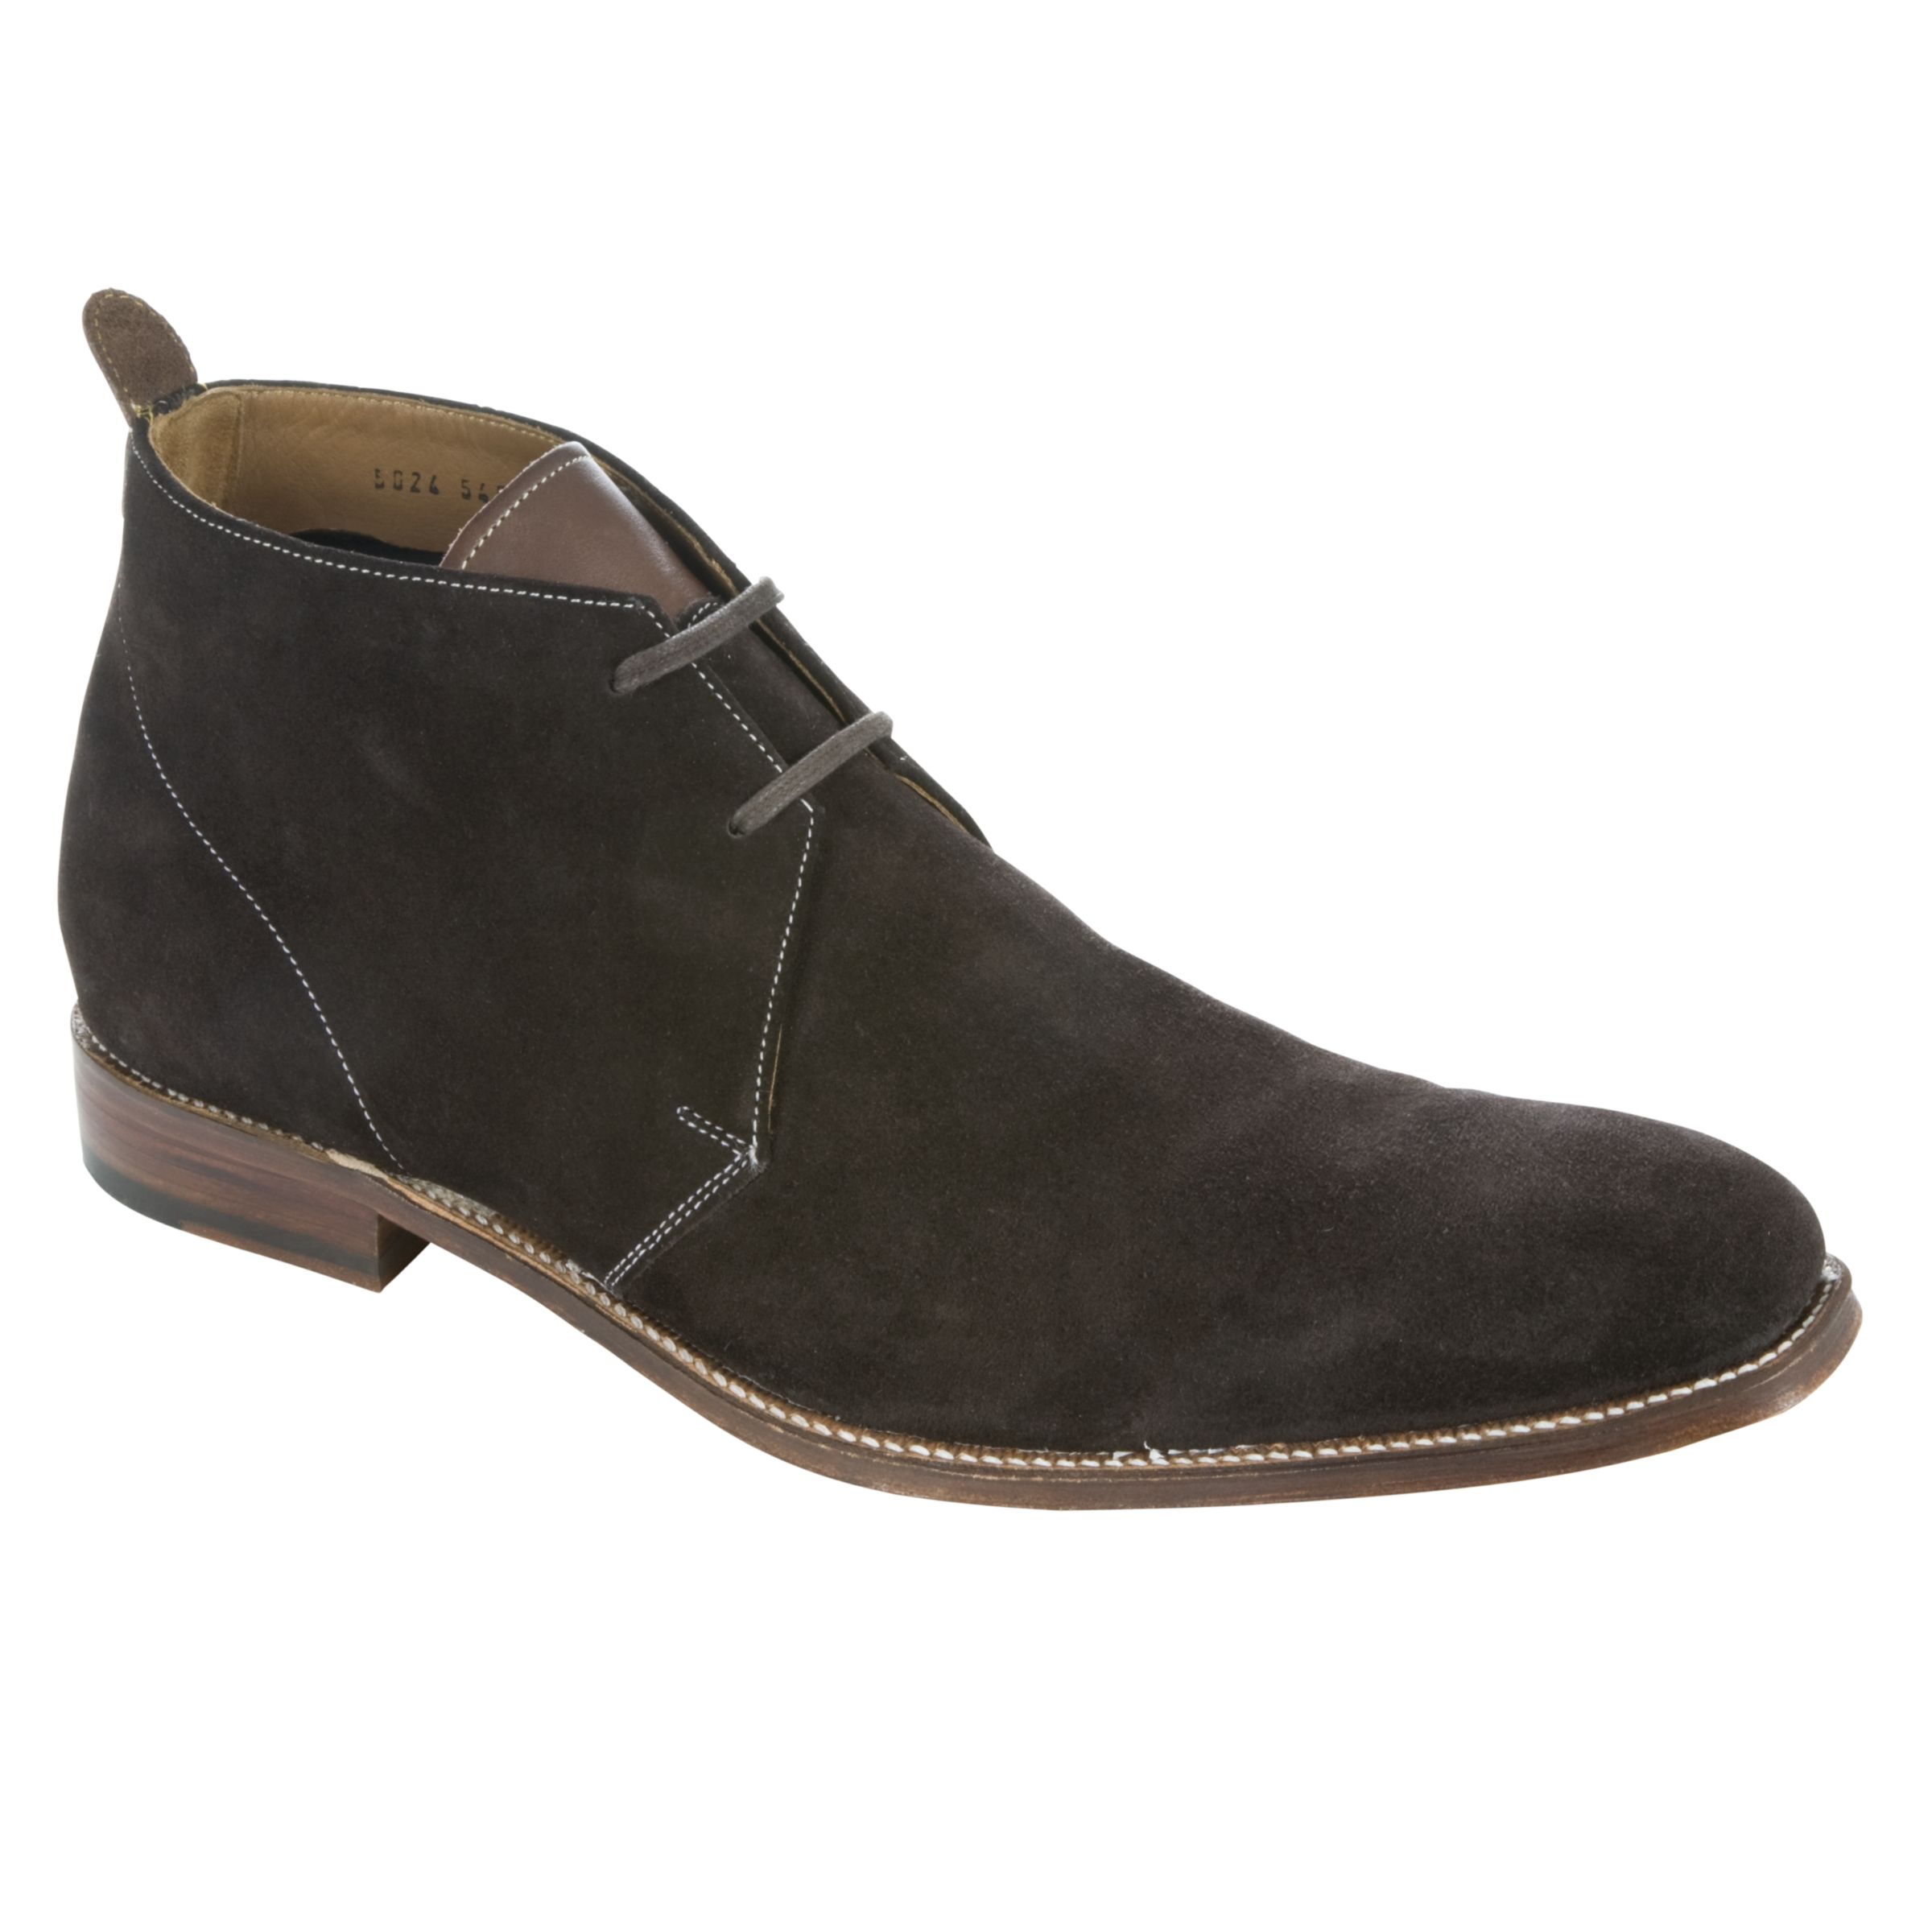 Grenson Smith Suede Lace Up Chukka Boots, Chocolate at John Lewis